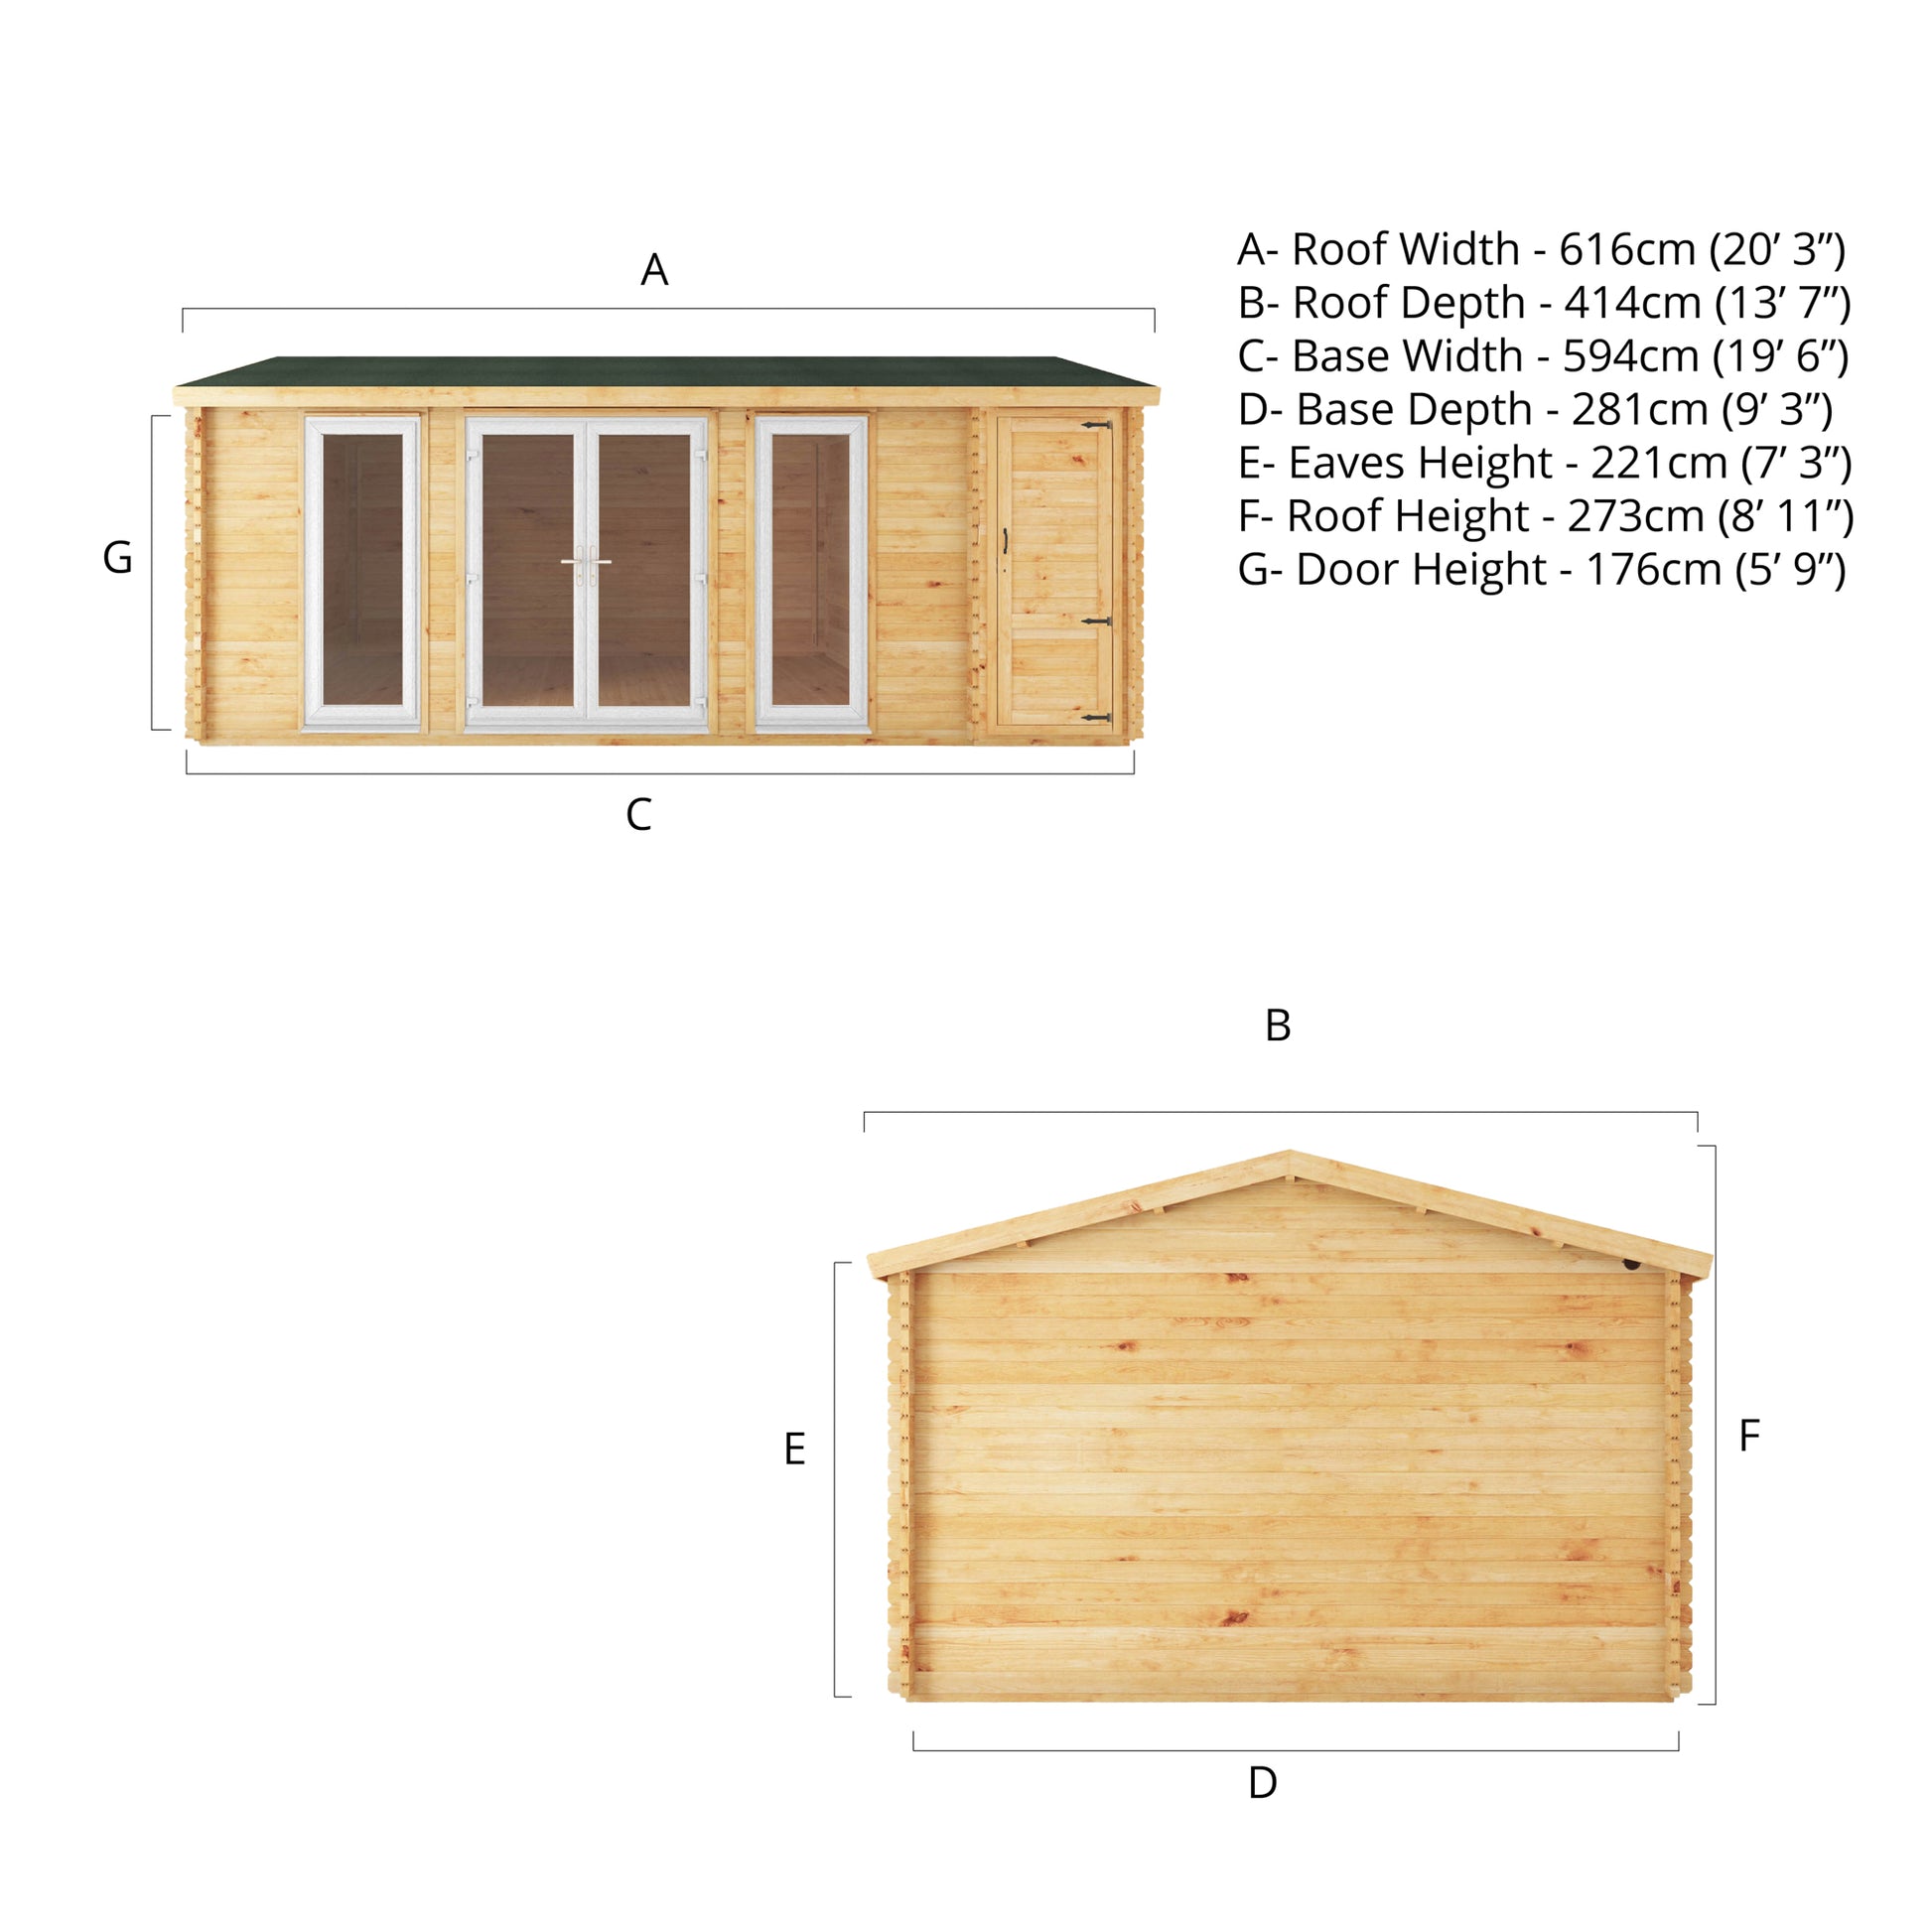 A specification image of a log cabin with double doors and a side shed